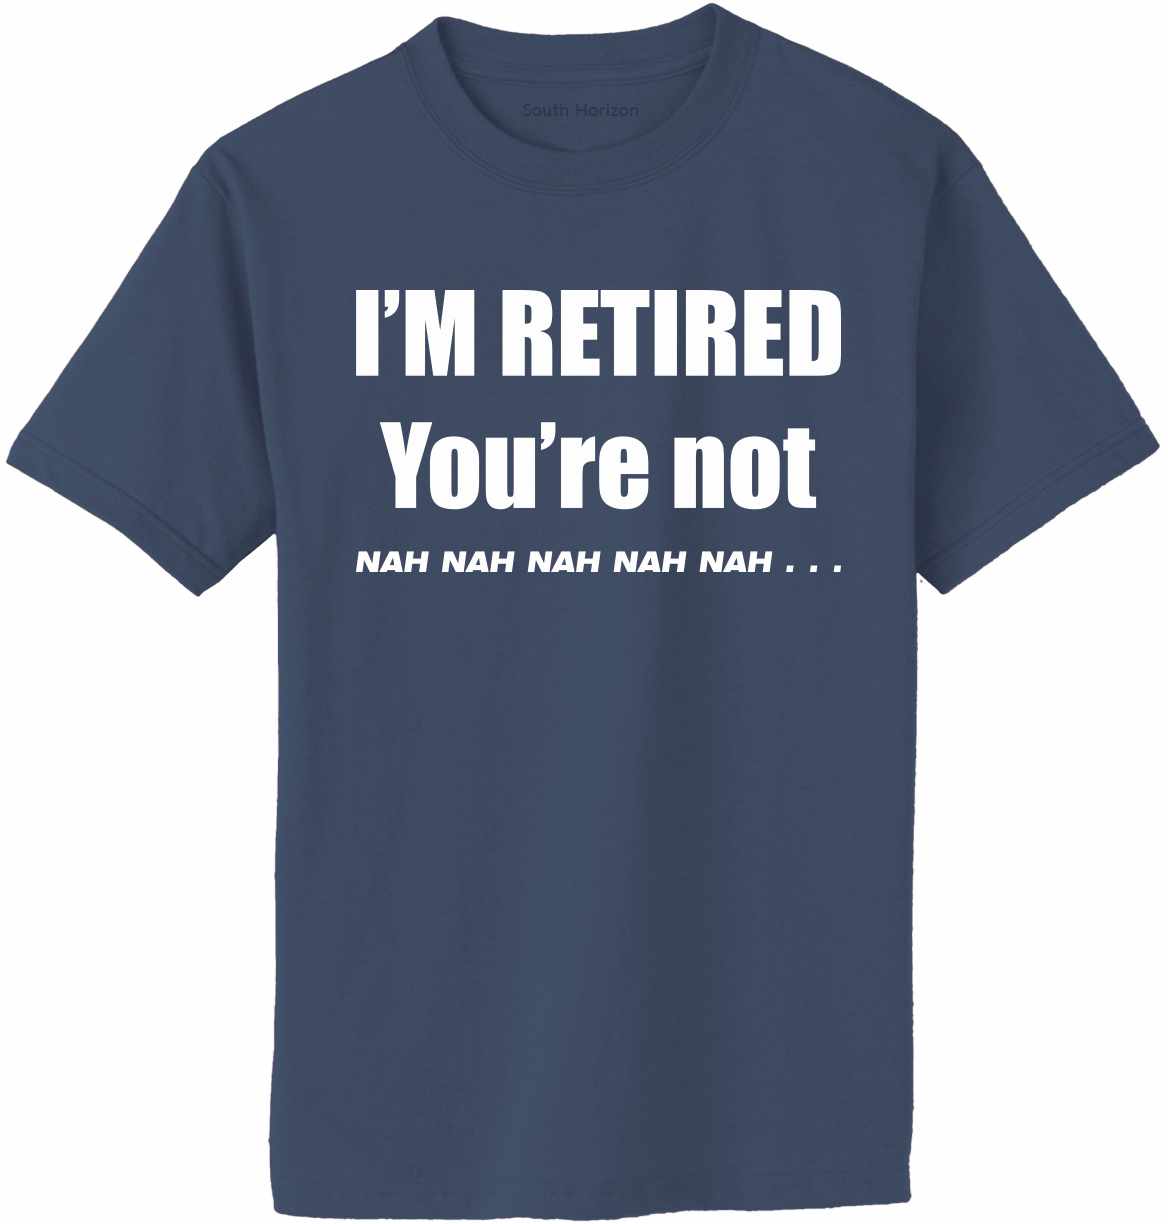 I'M RETIRED YOU ARE NOT, NAH, NAH, NAH Adult T-Shirt (#904-1)